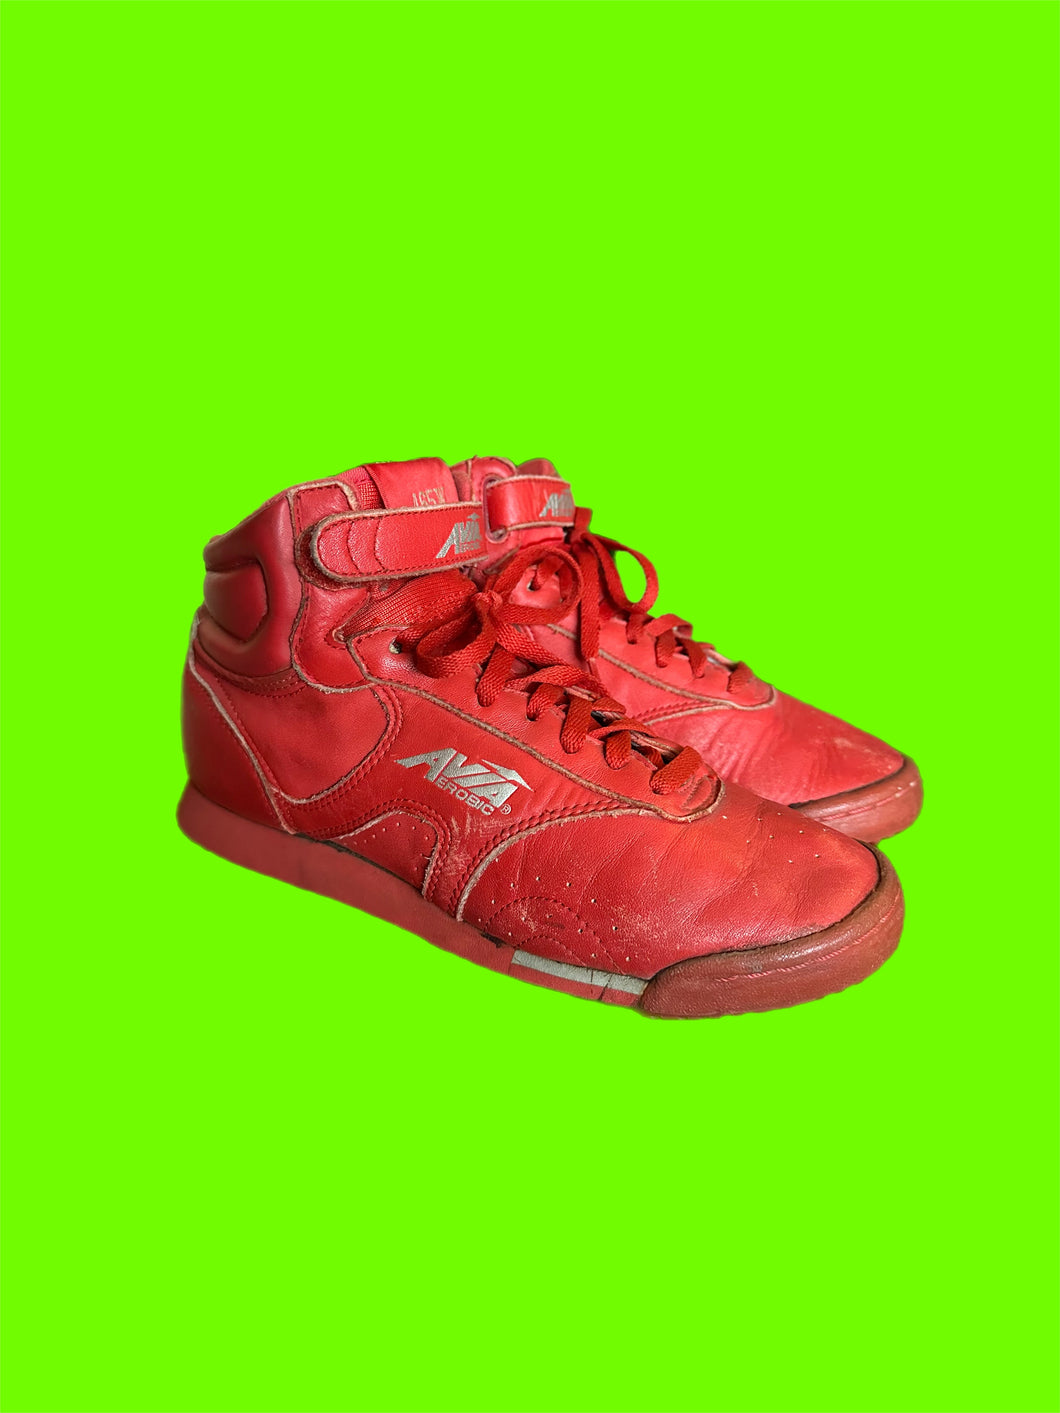 Vintage 80s red Avia high tops